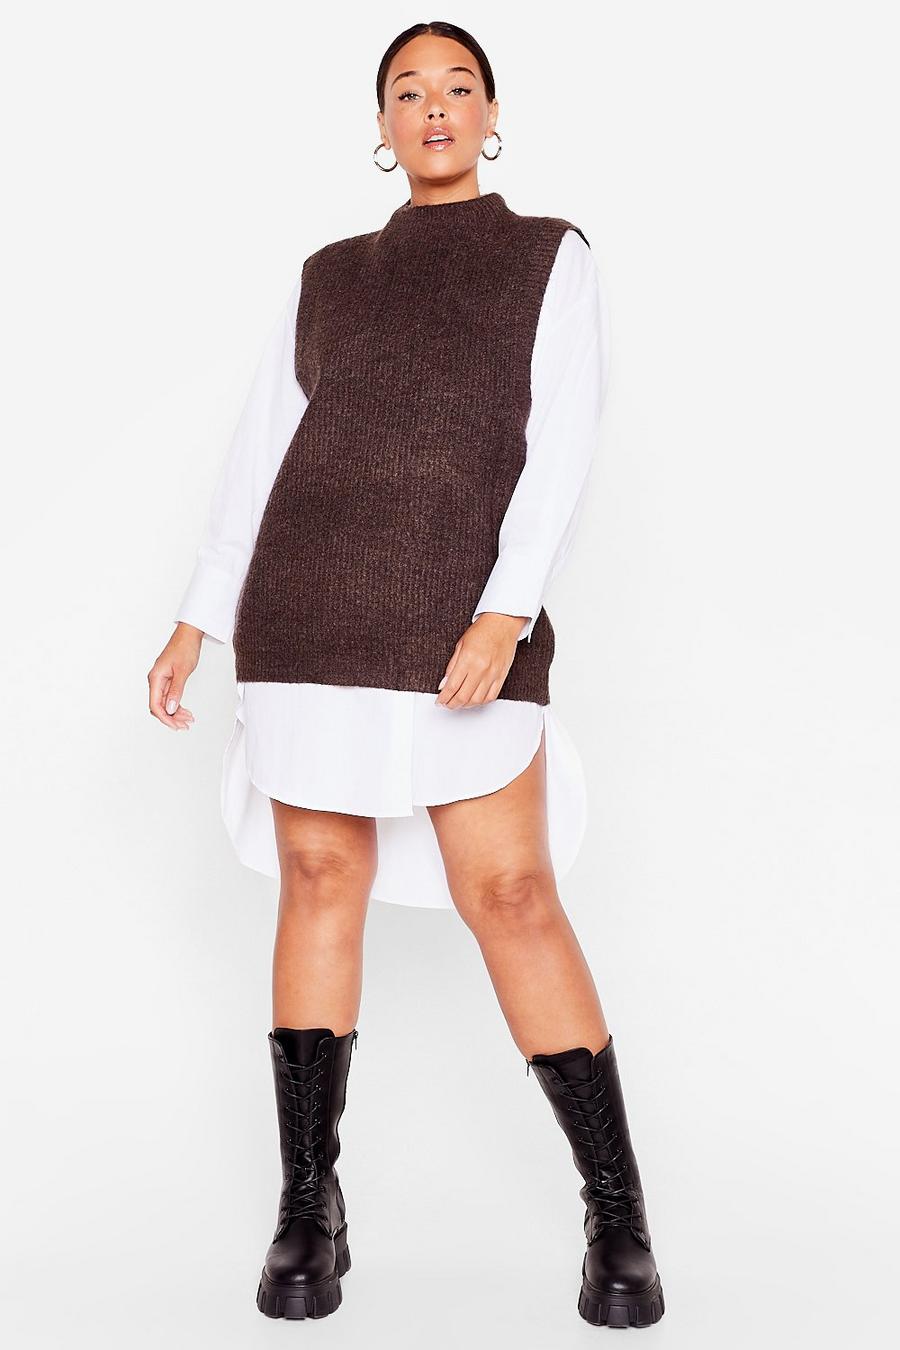 Plus Size Knitted Vest Top